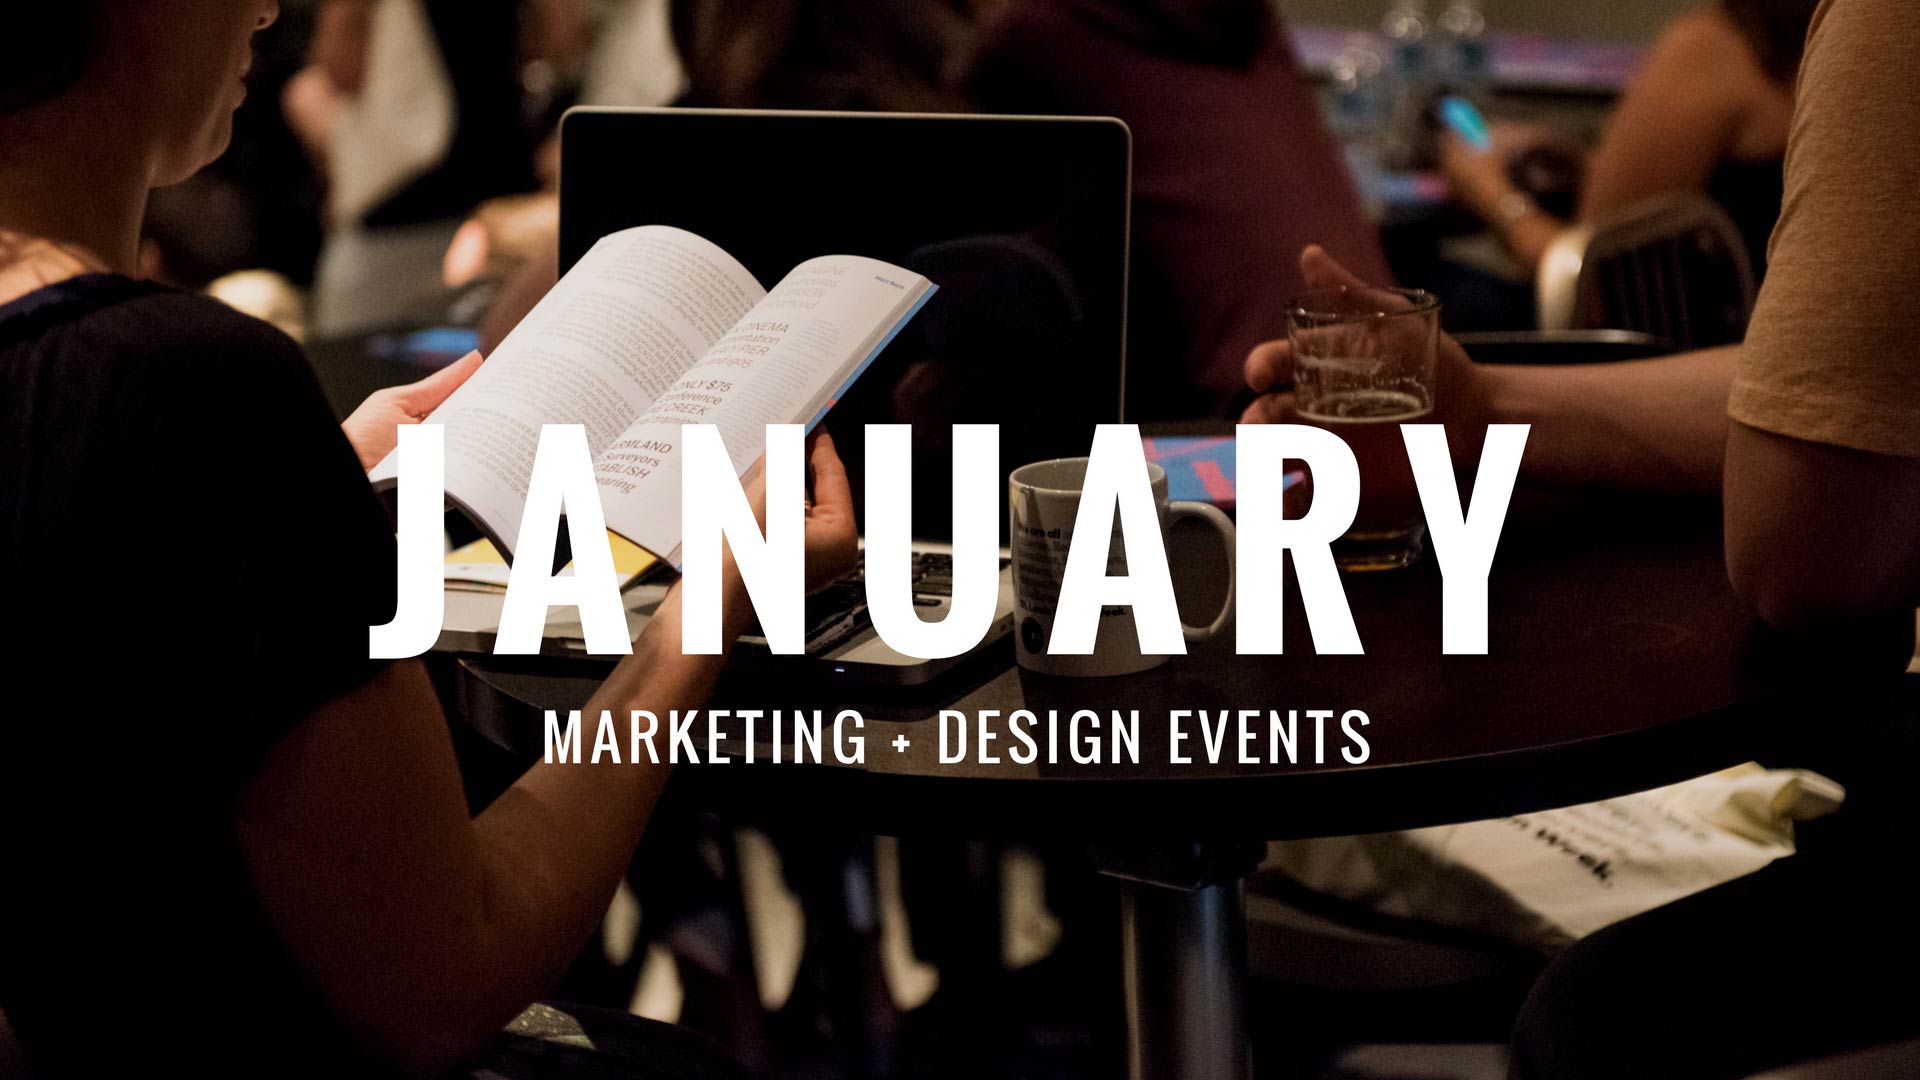 January 2018 Marketing and Design Events in St. Louis